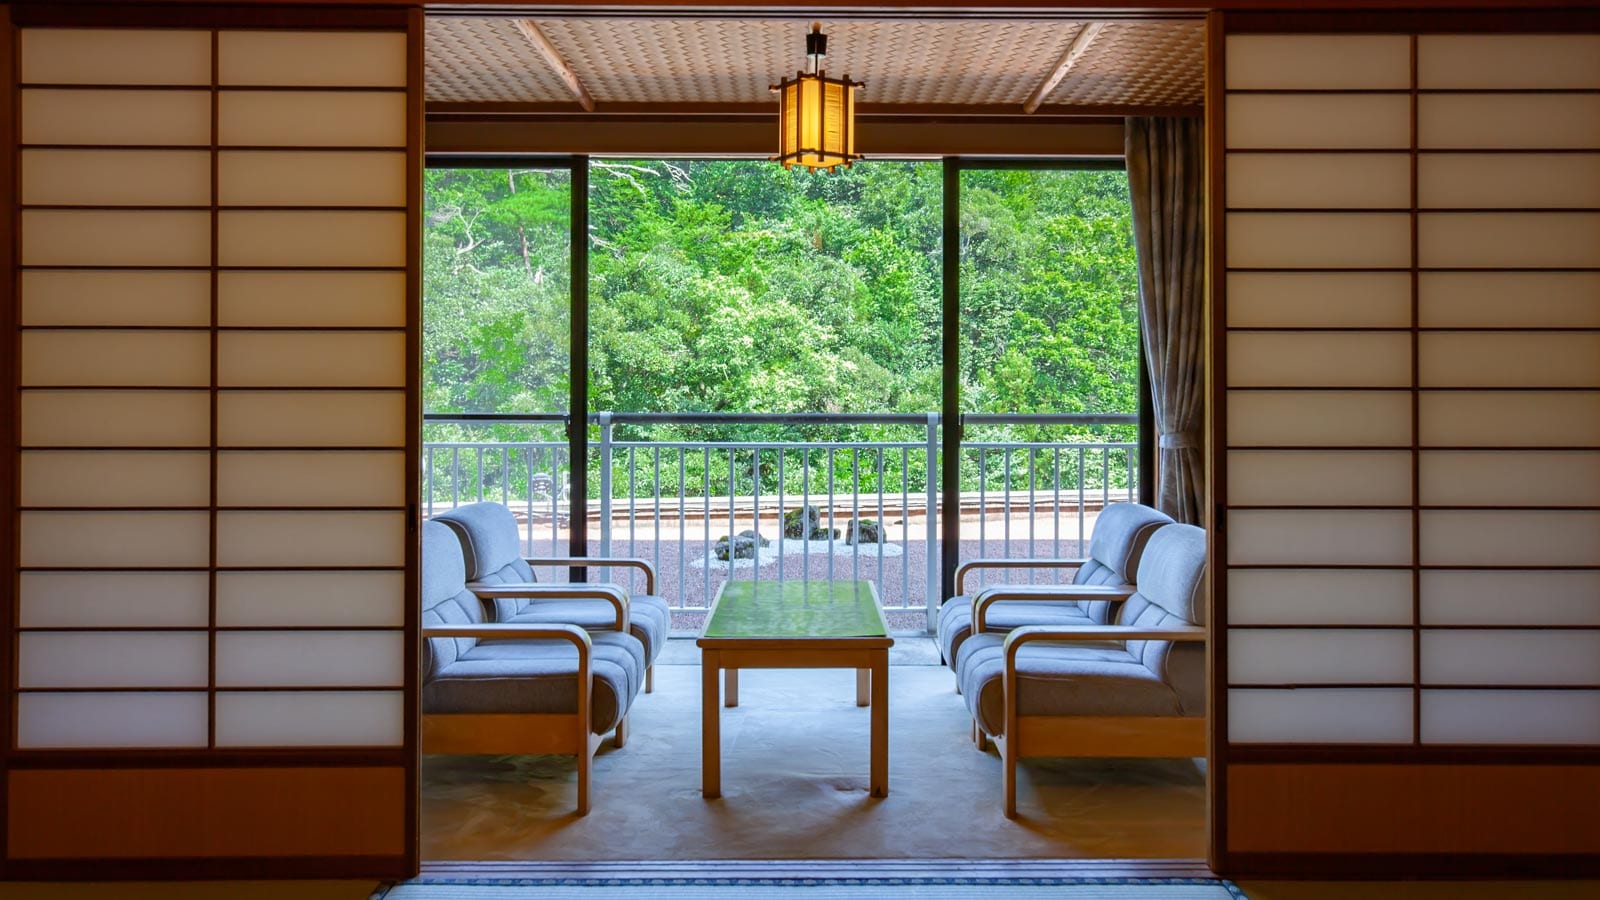 -Reasonable guest rooms with 10 tatami mats or more-We will guide you in a compact guest room with 10 tatami mats or more.